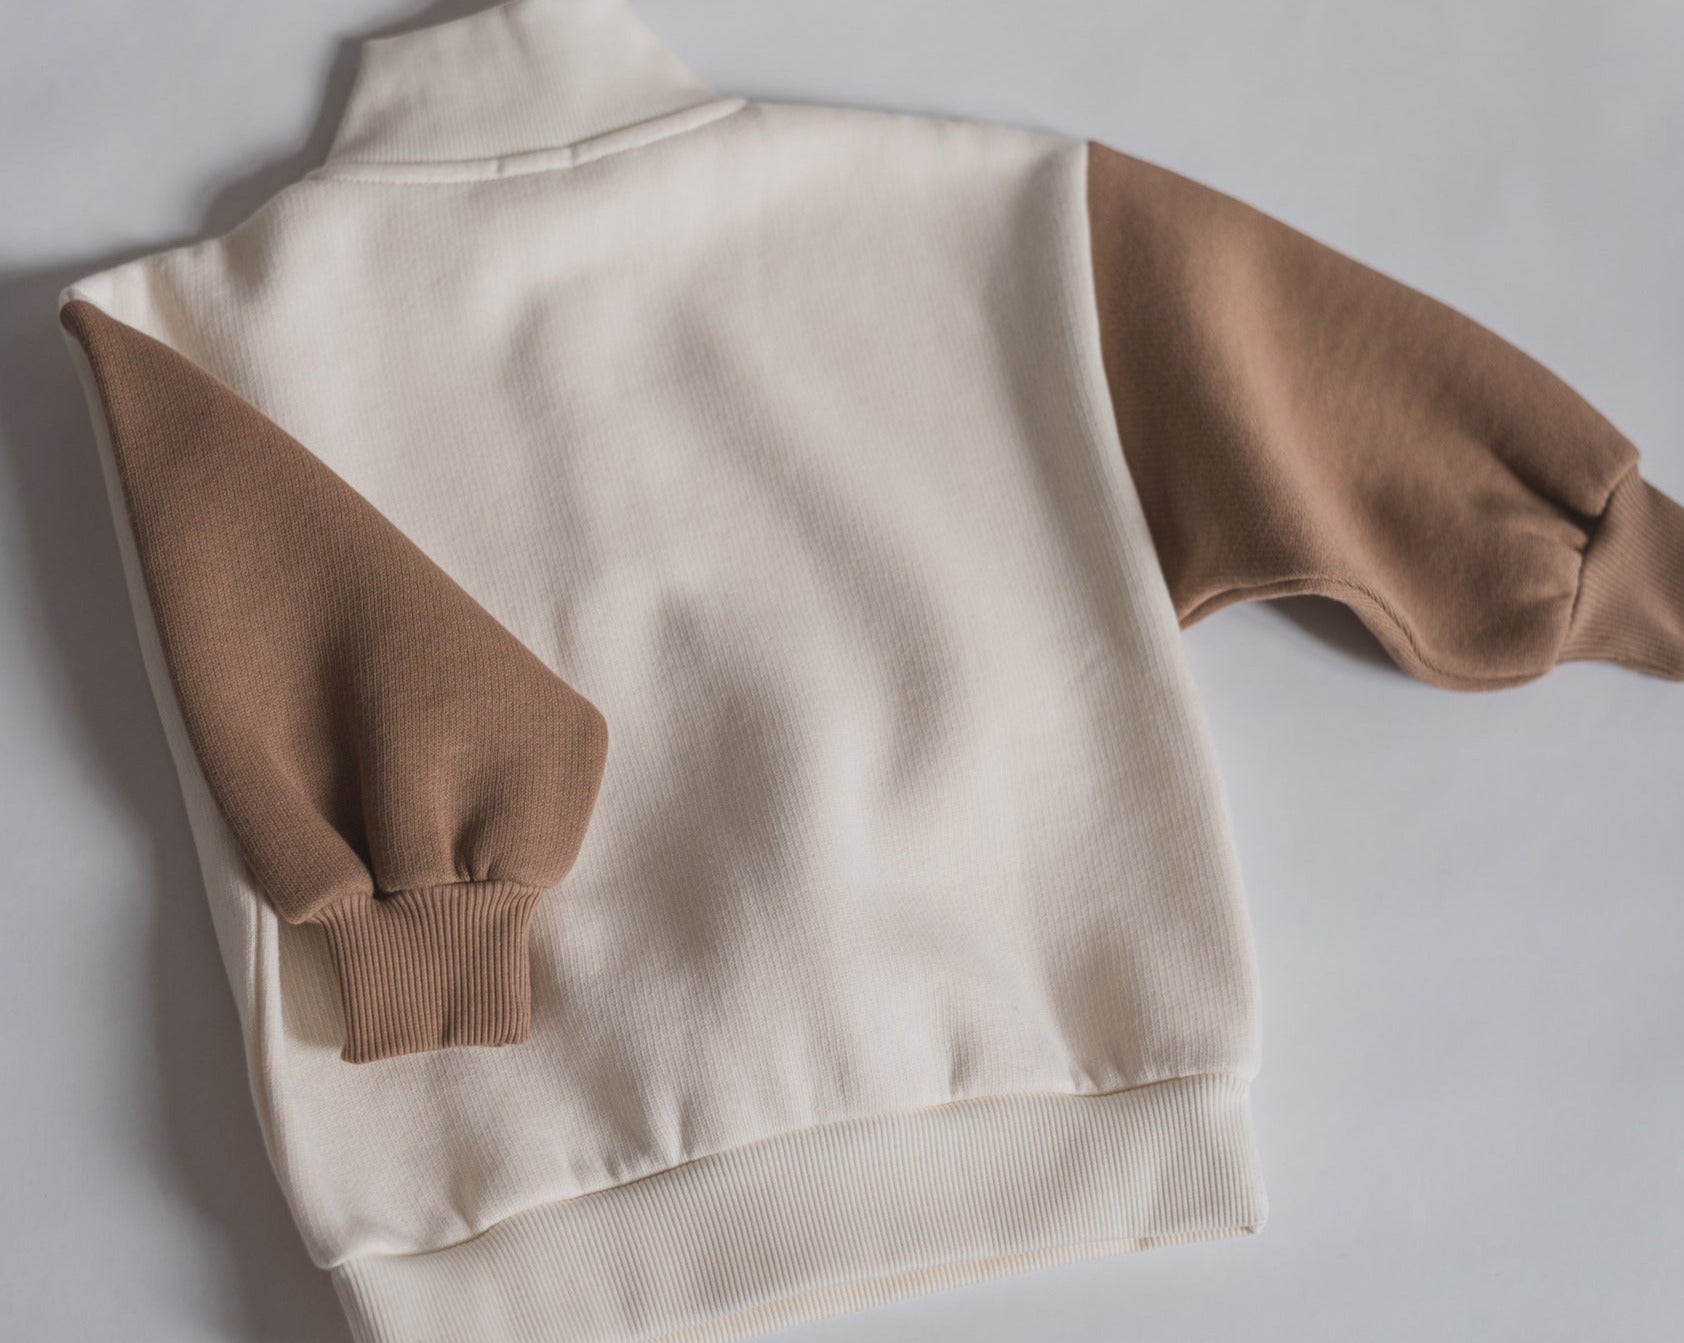 Offwhite sweatshirt with brown contrast sleeves, foldable cuffs with an oversized fit.